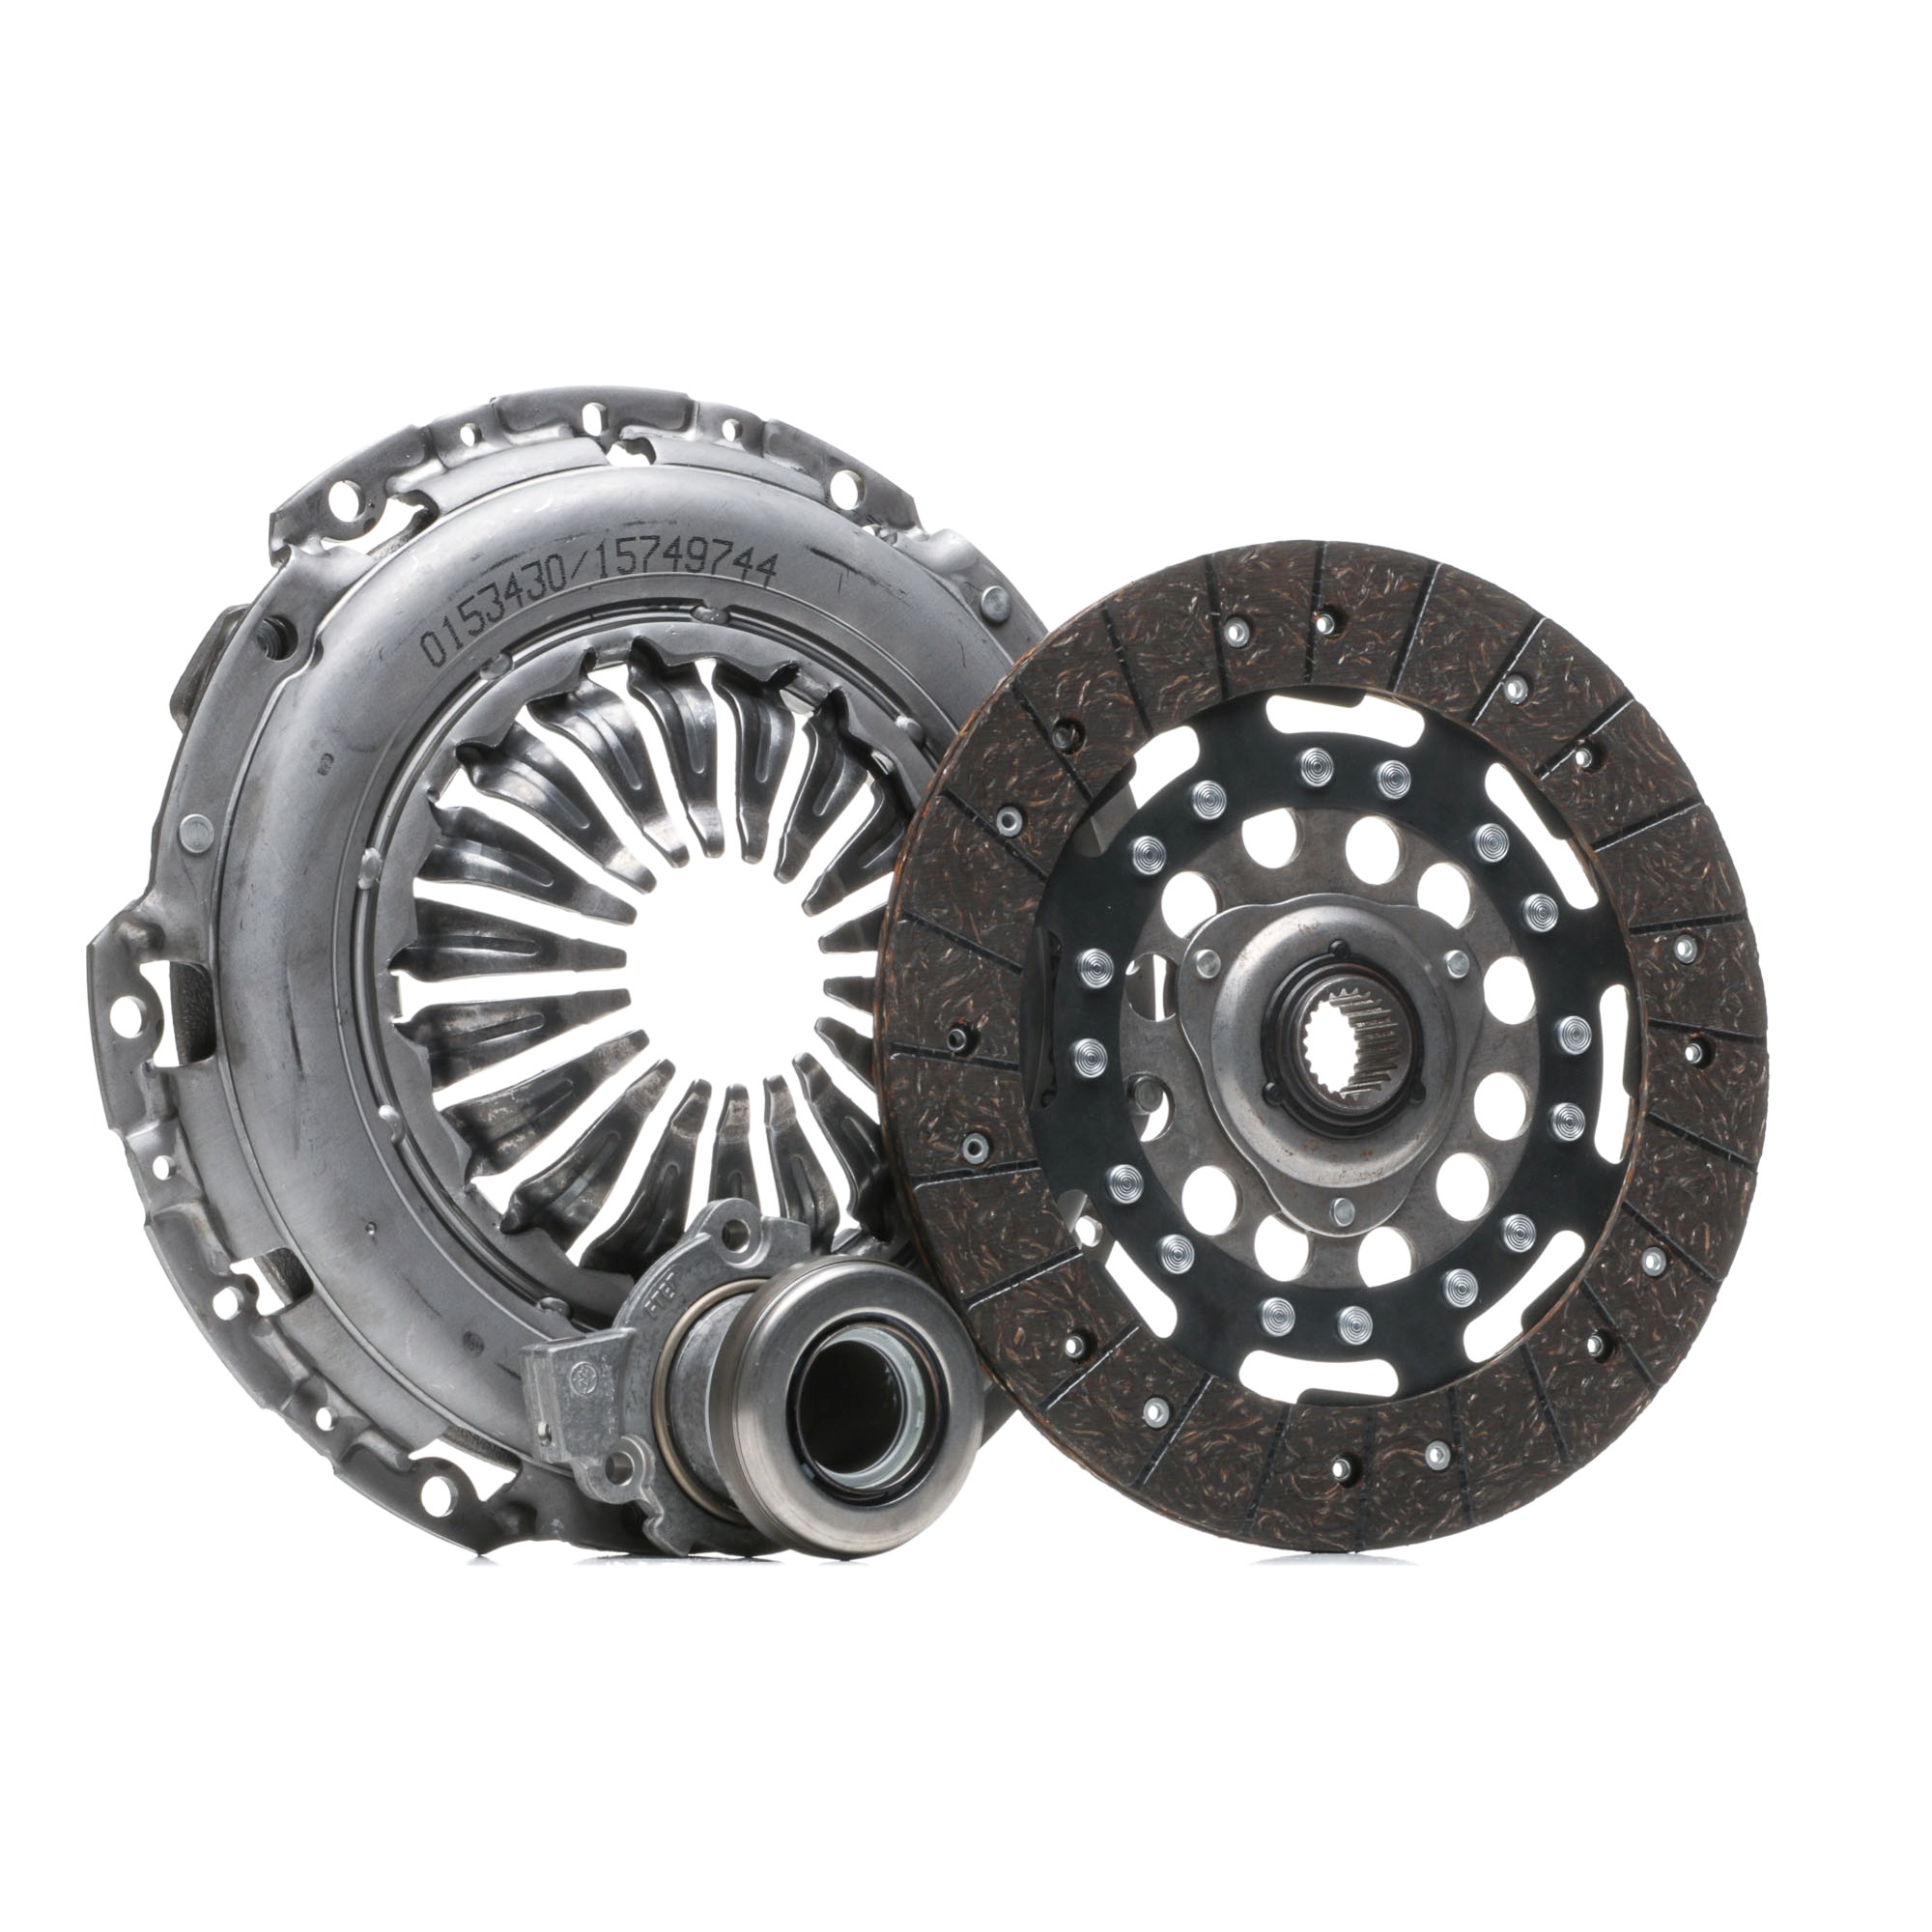 STARK SKCK-0100902 Clutch kit SAAB experience and price